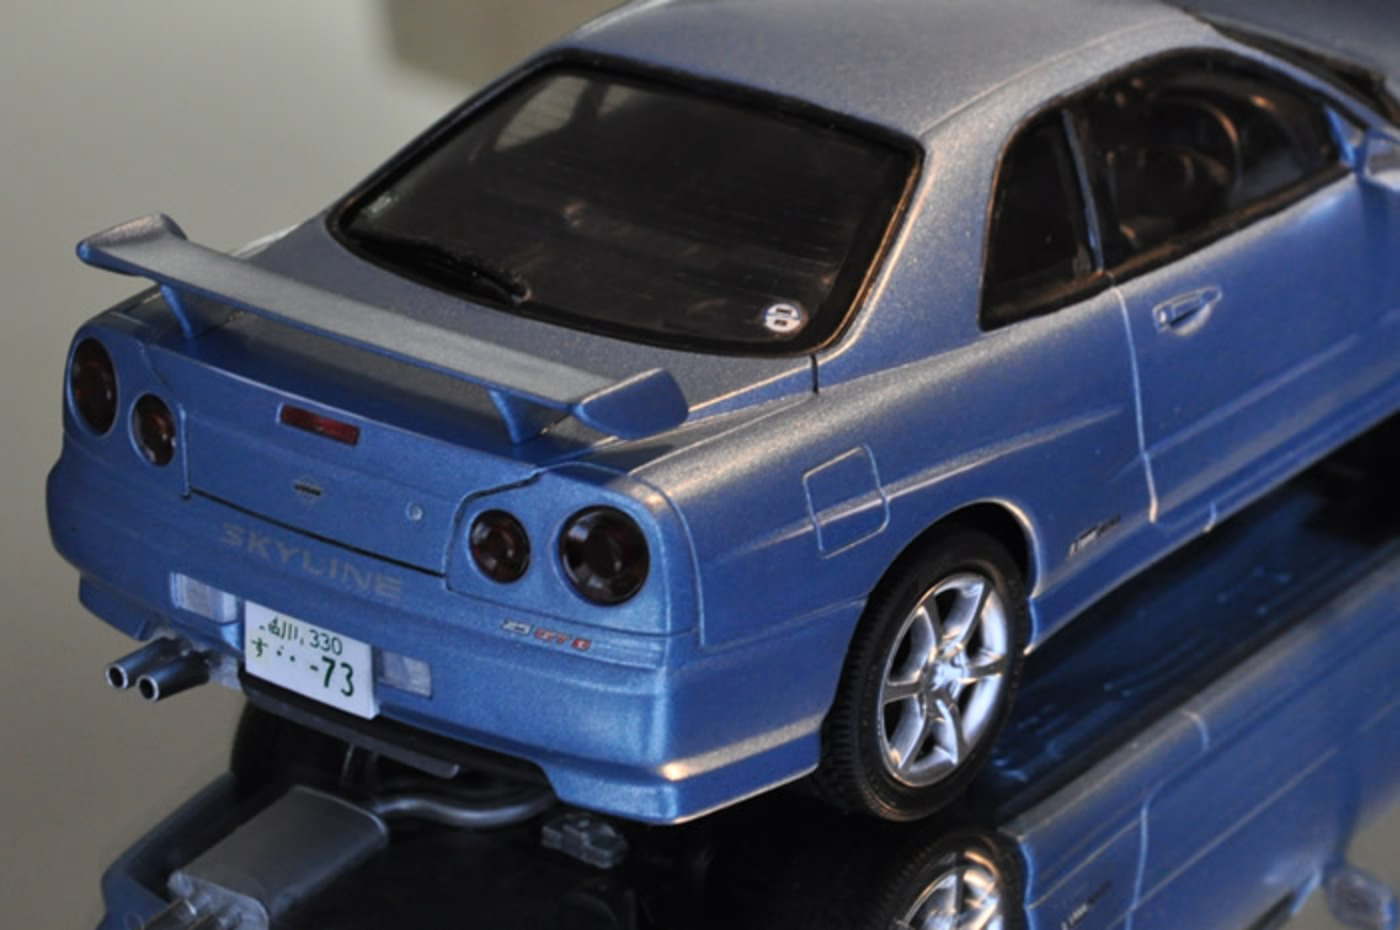 Fujimi Nissan Skyline GT-T completed in February 2010 .